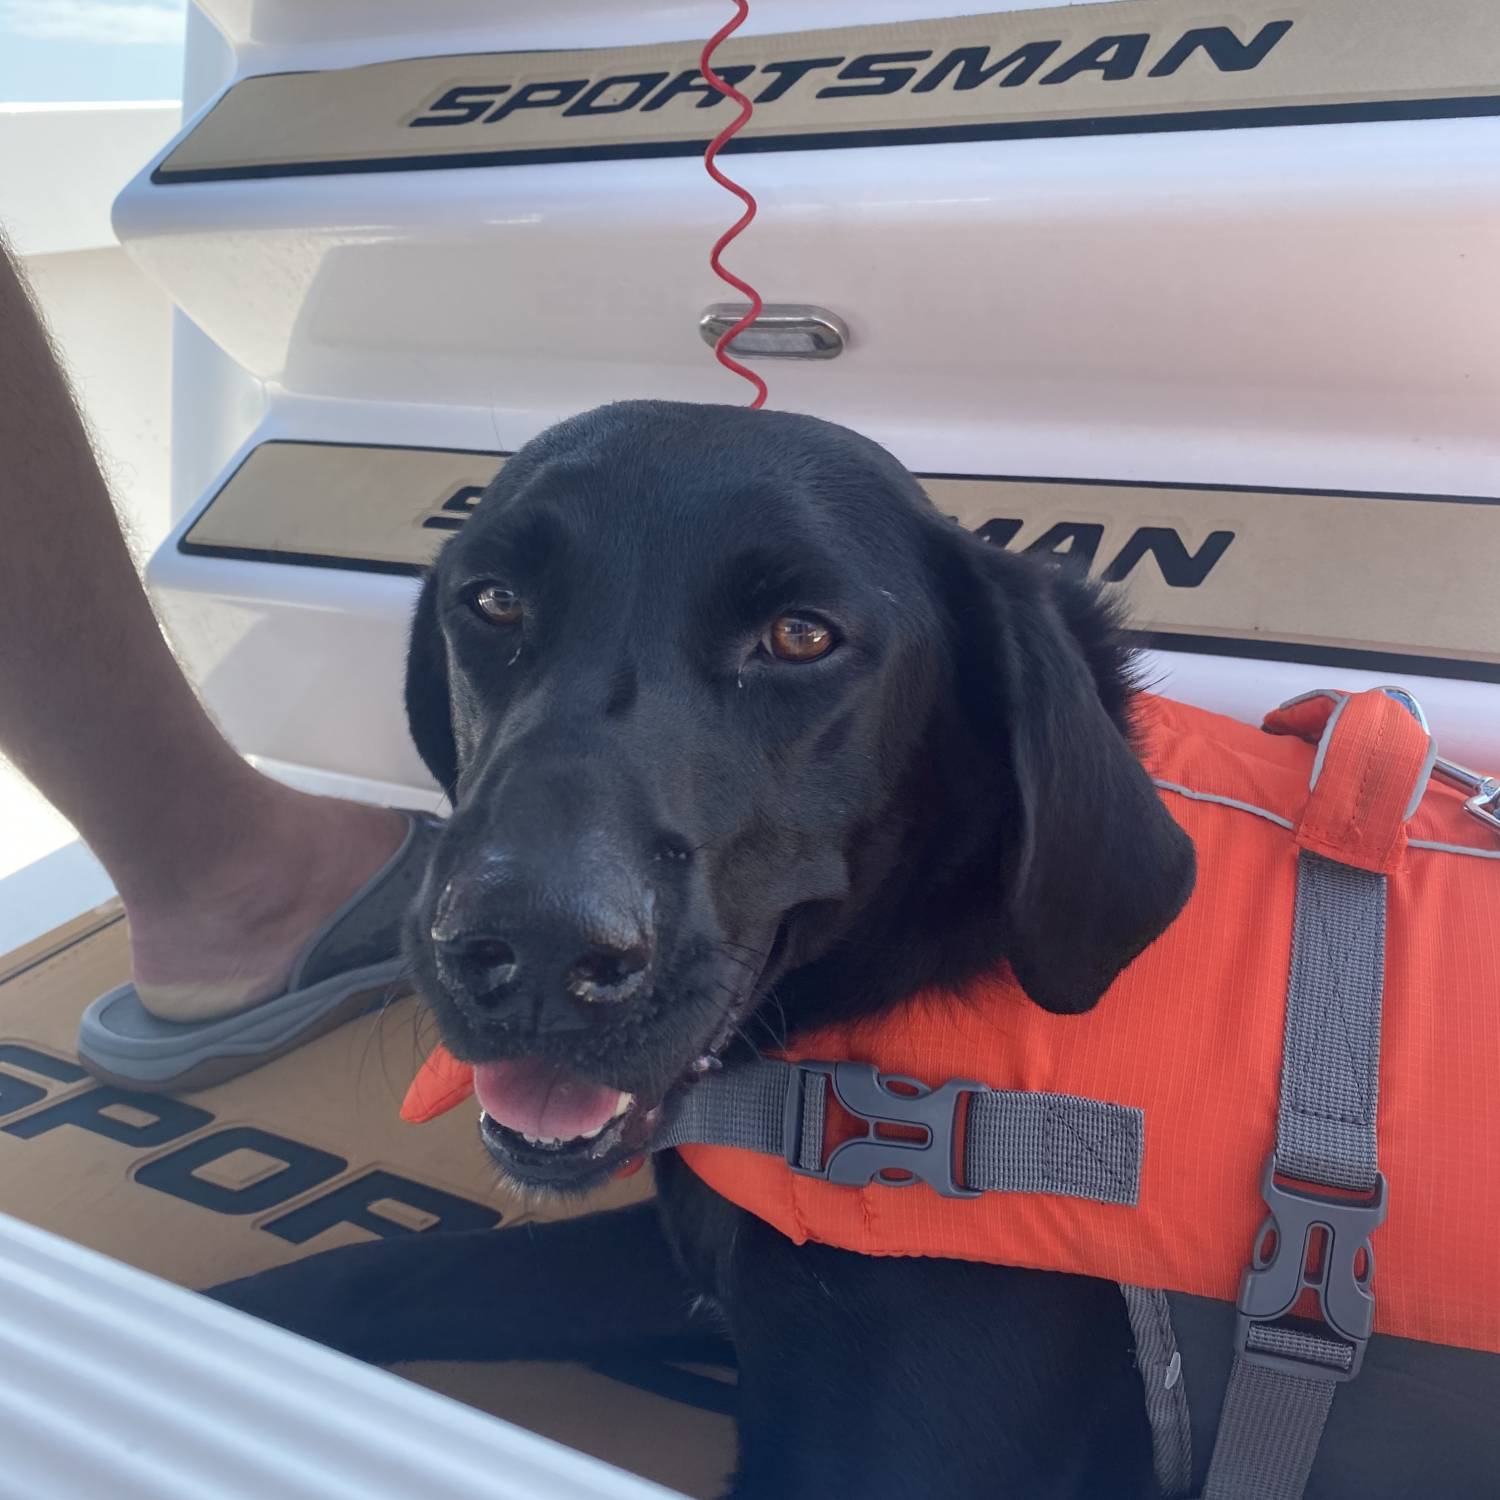 Our lab, Luna, Enjoying a boat day in the sunshine